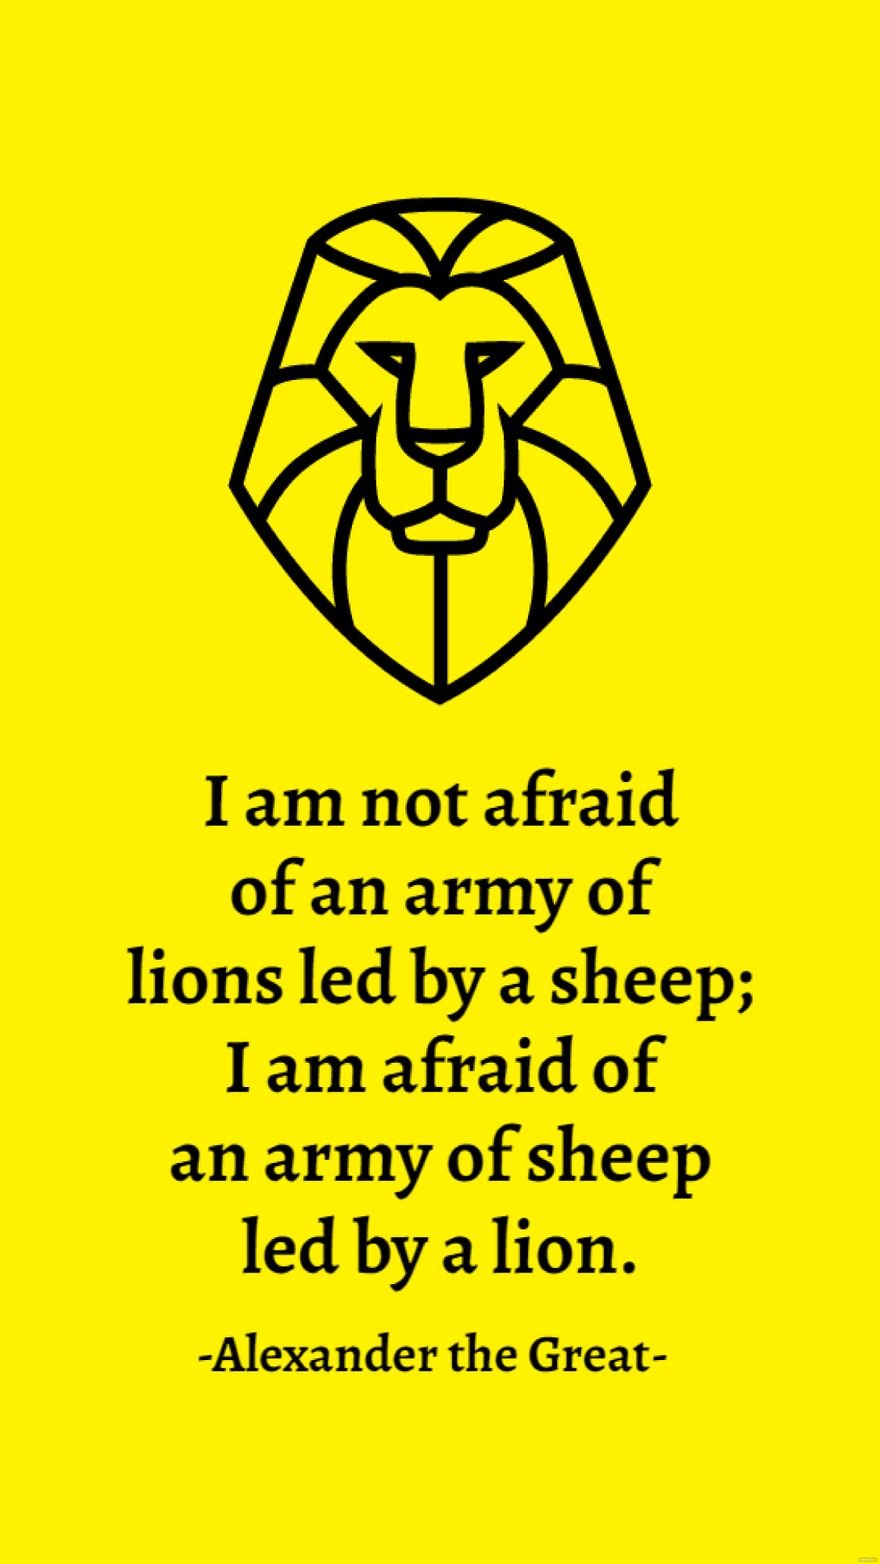 Alexander the Great - I am not afraid of an army of lions led by a sheep; I am afraid of an army of sheep led by a lion.